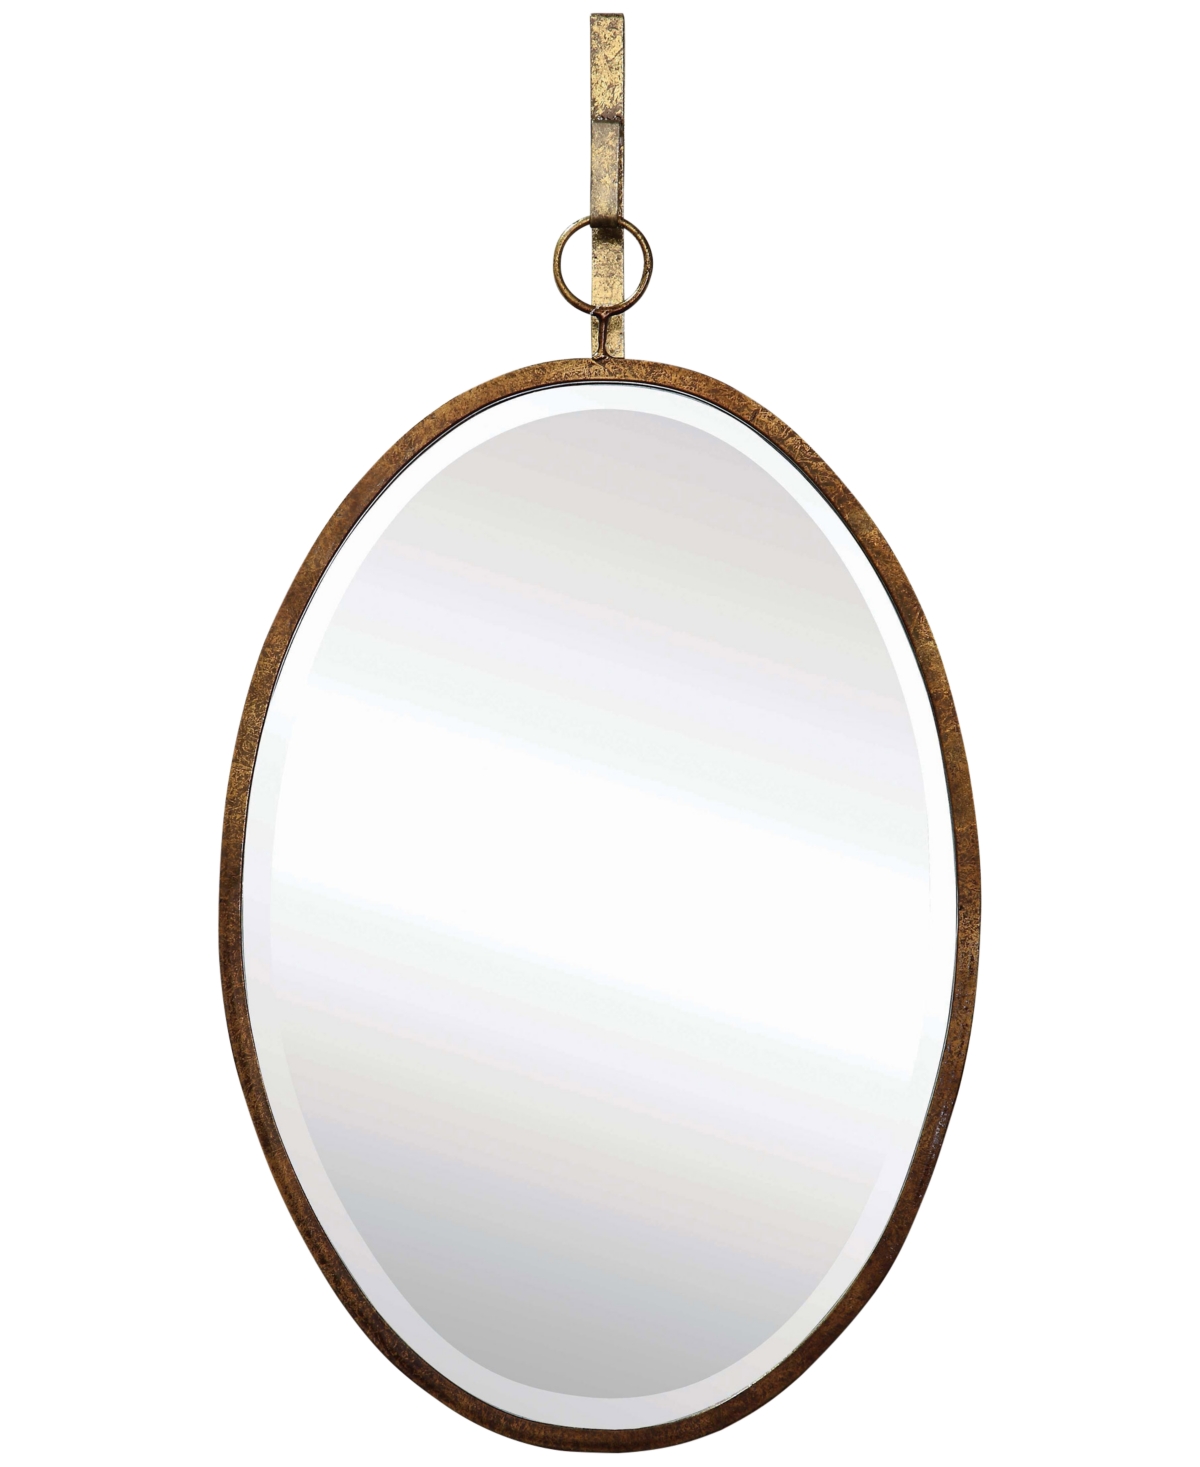 Oval Metal Framed Wall Mirror with Bracket, Gold-Tone Finish